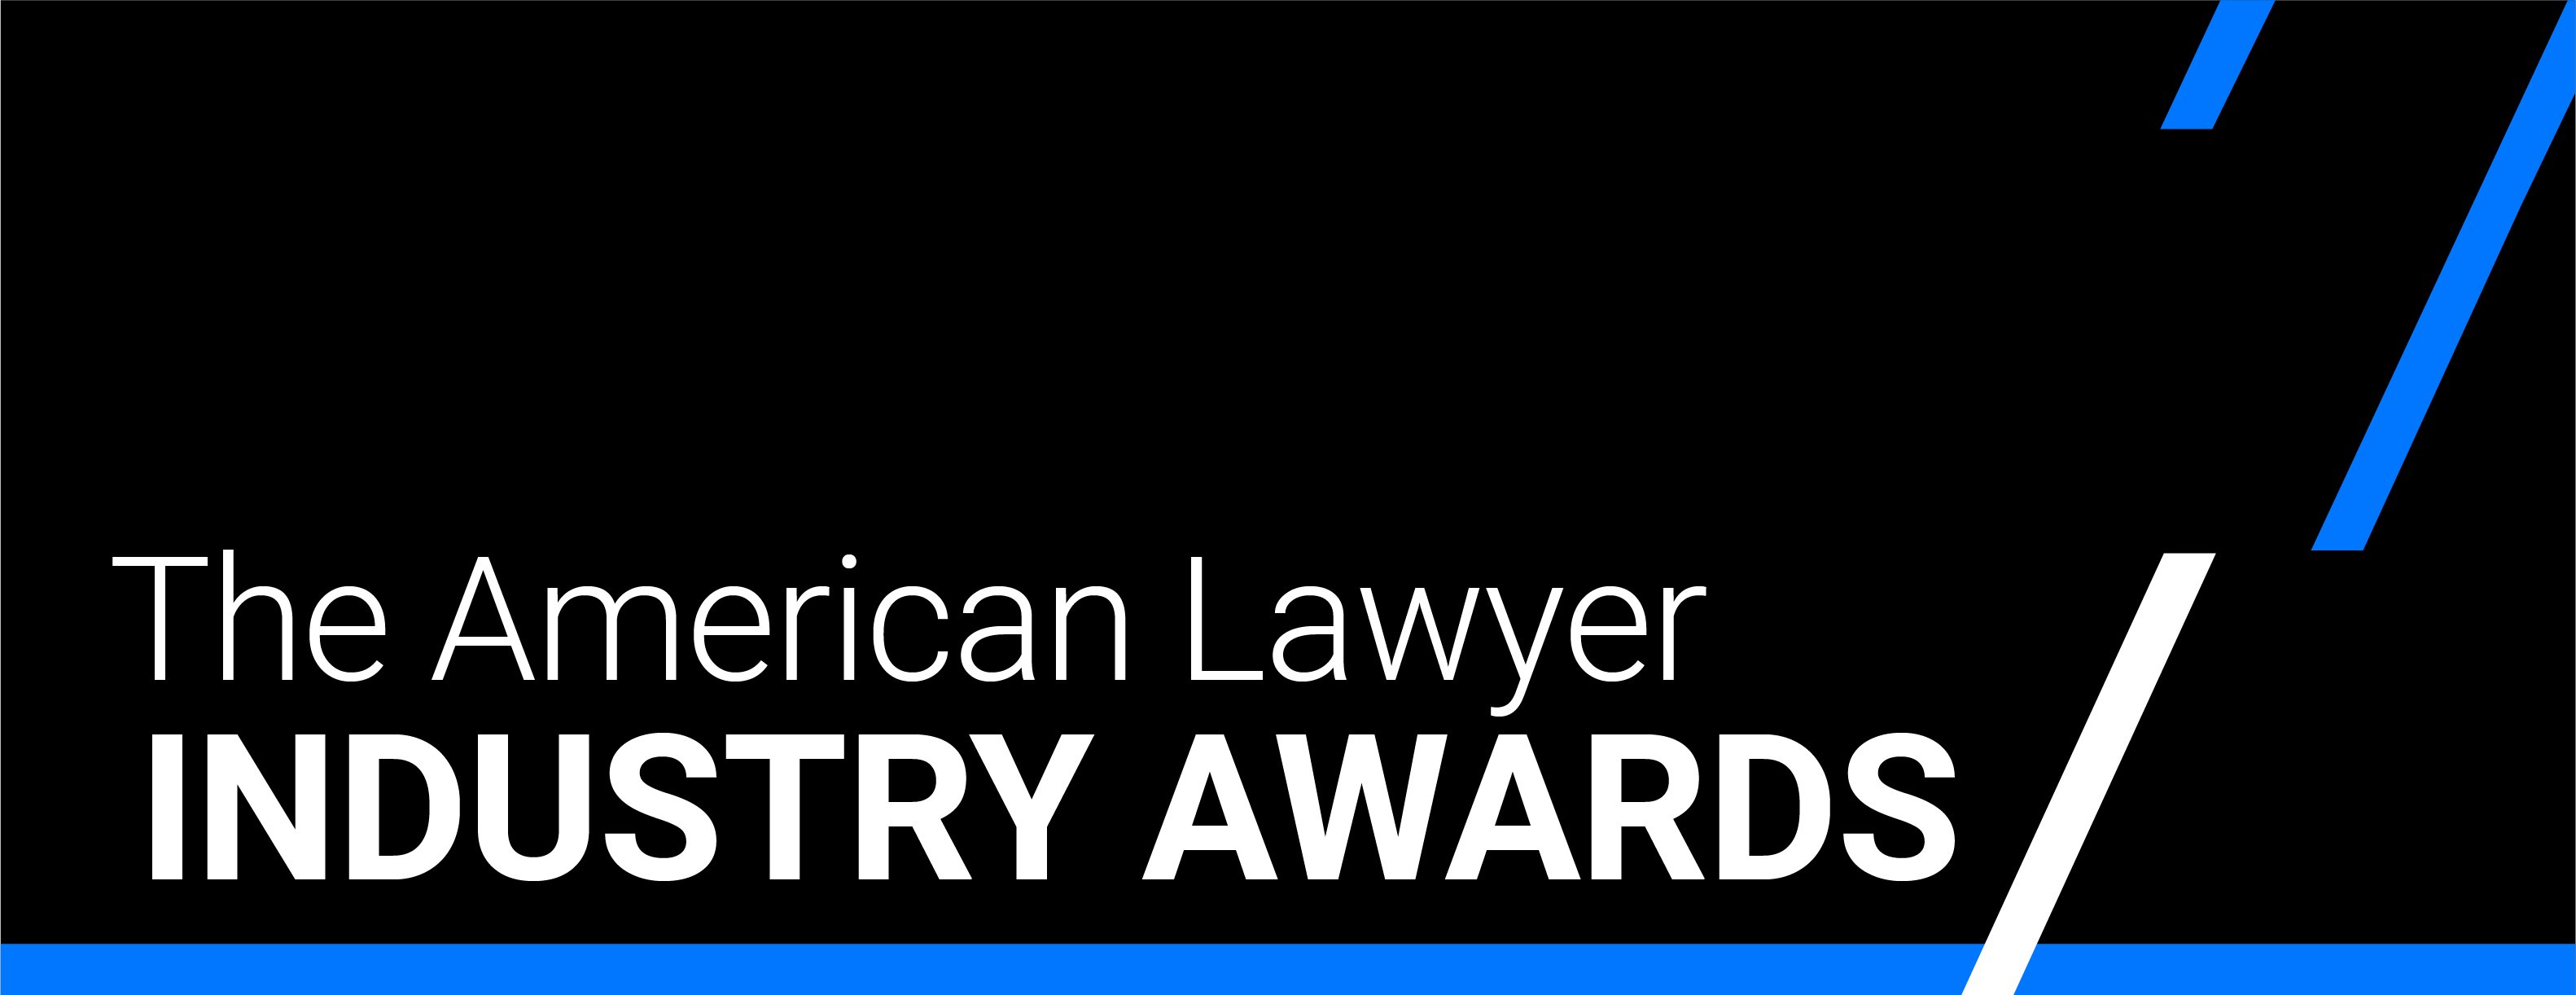 Meet The American Lawyer's Attorney of the Year Finalists The